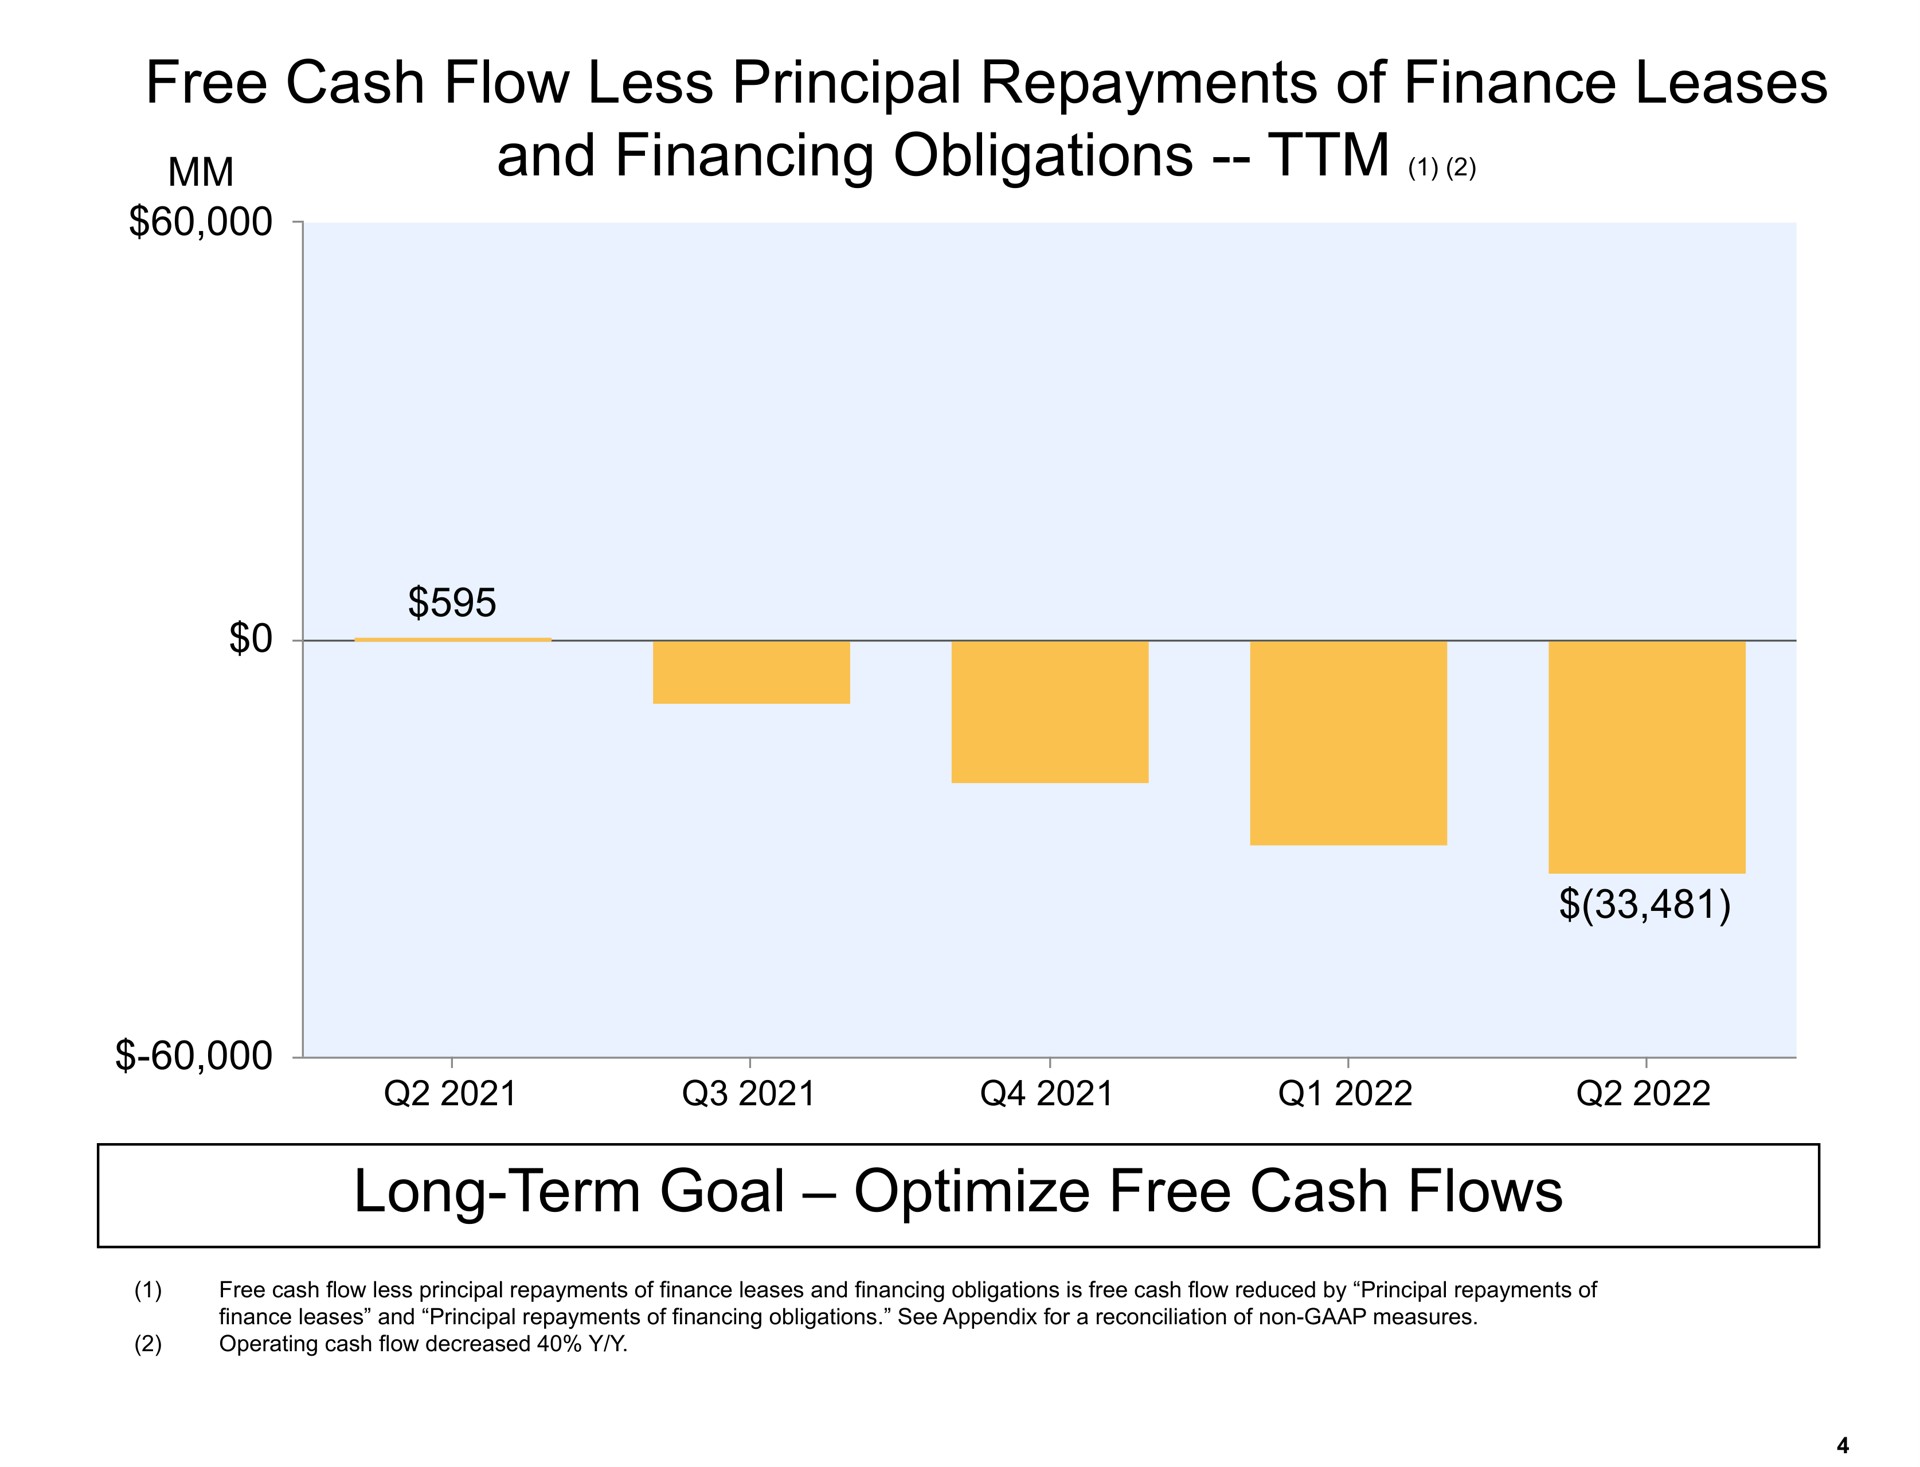 free cash flow less principal repayments of finance leases and financing obligations long term goal optimize free cash flows a | Amazon